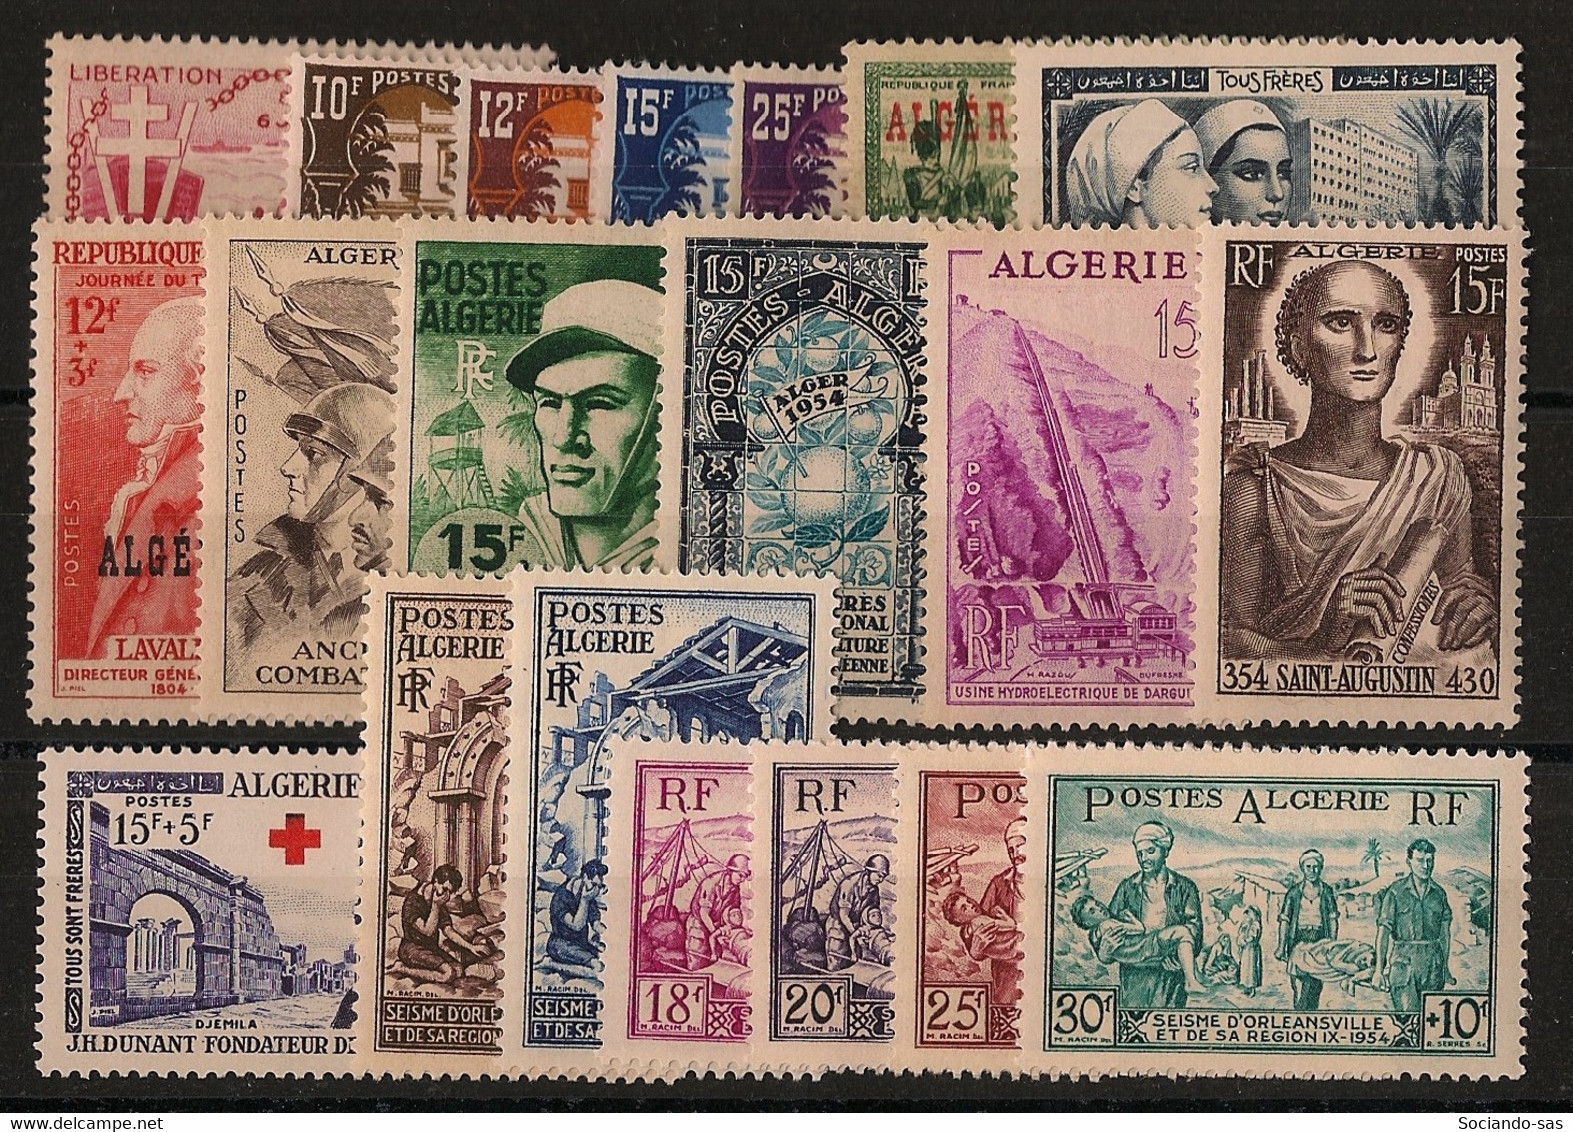 ALGERIE - Année Complète 1954 - N°YT. 308 à 324 - Complet - 20 Valeurs - Neuf Luxe ** / MNH / Postfrisch - Full Years